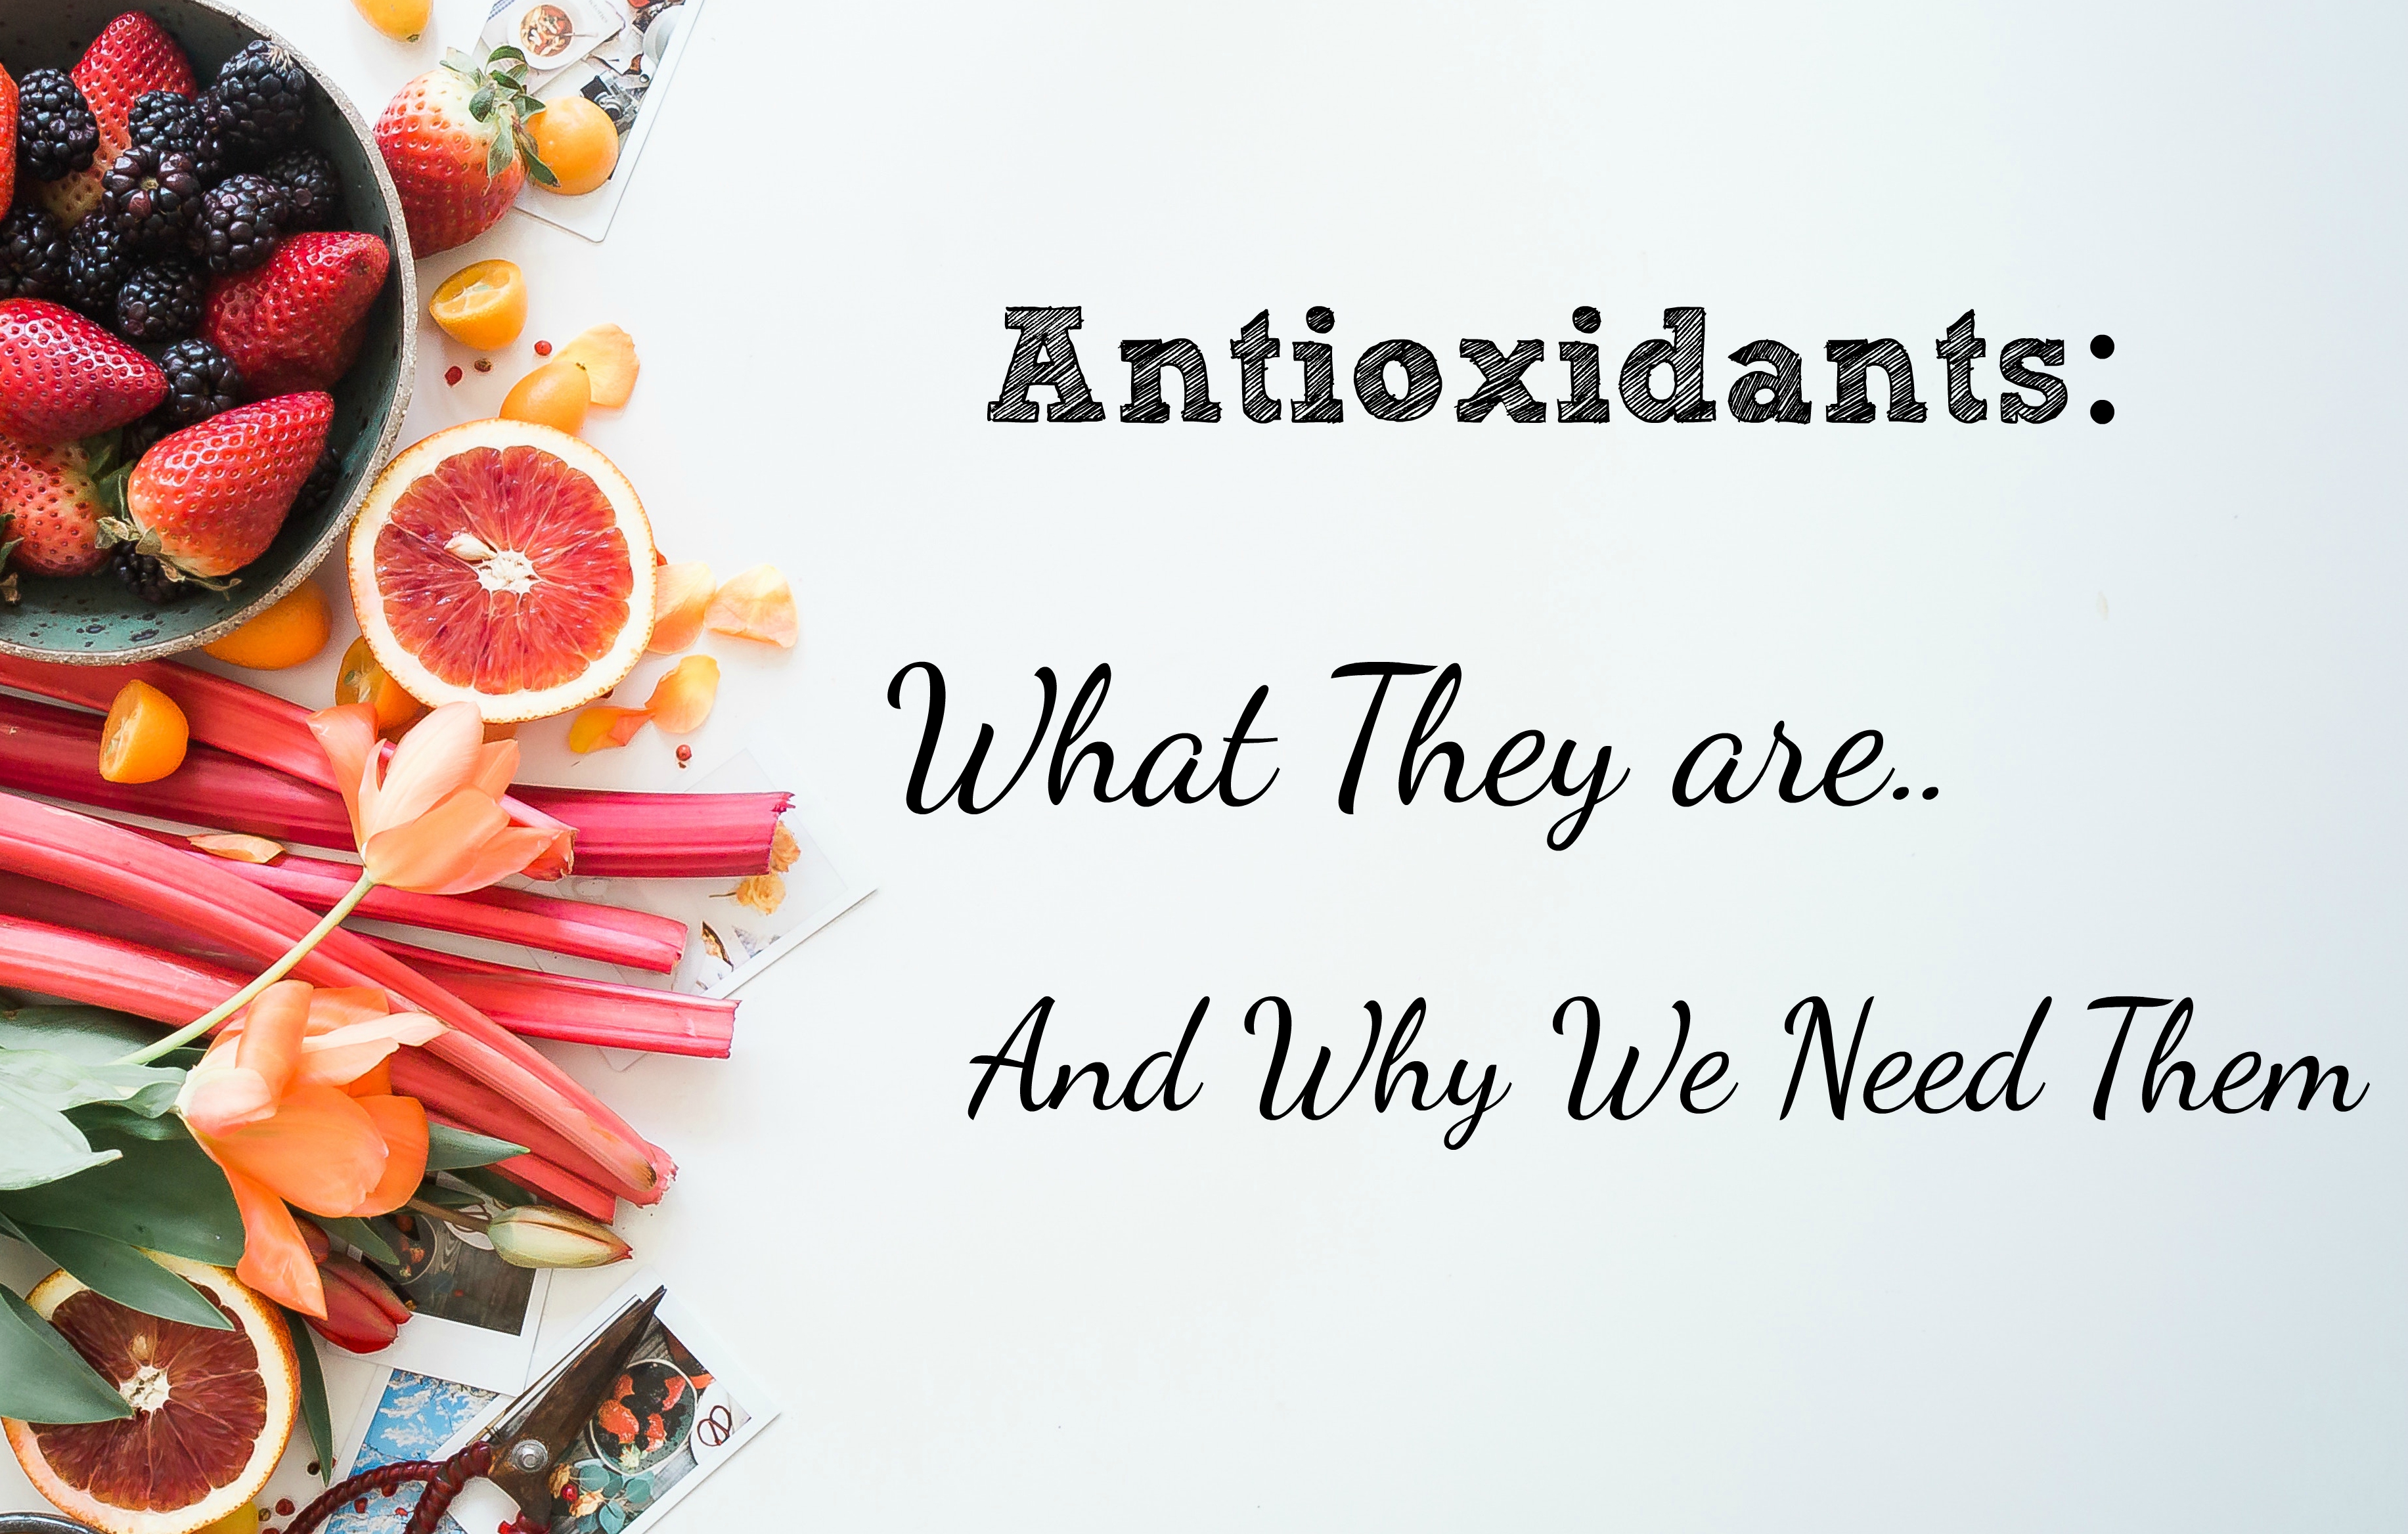 What are antioxidants and why do we need them?